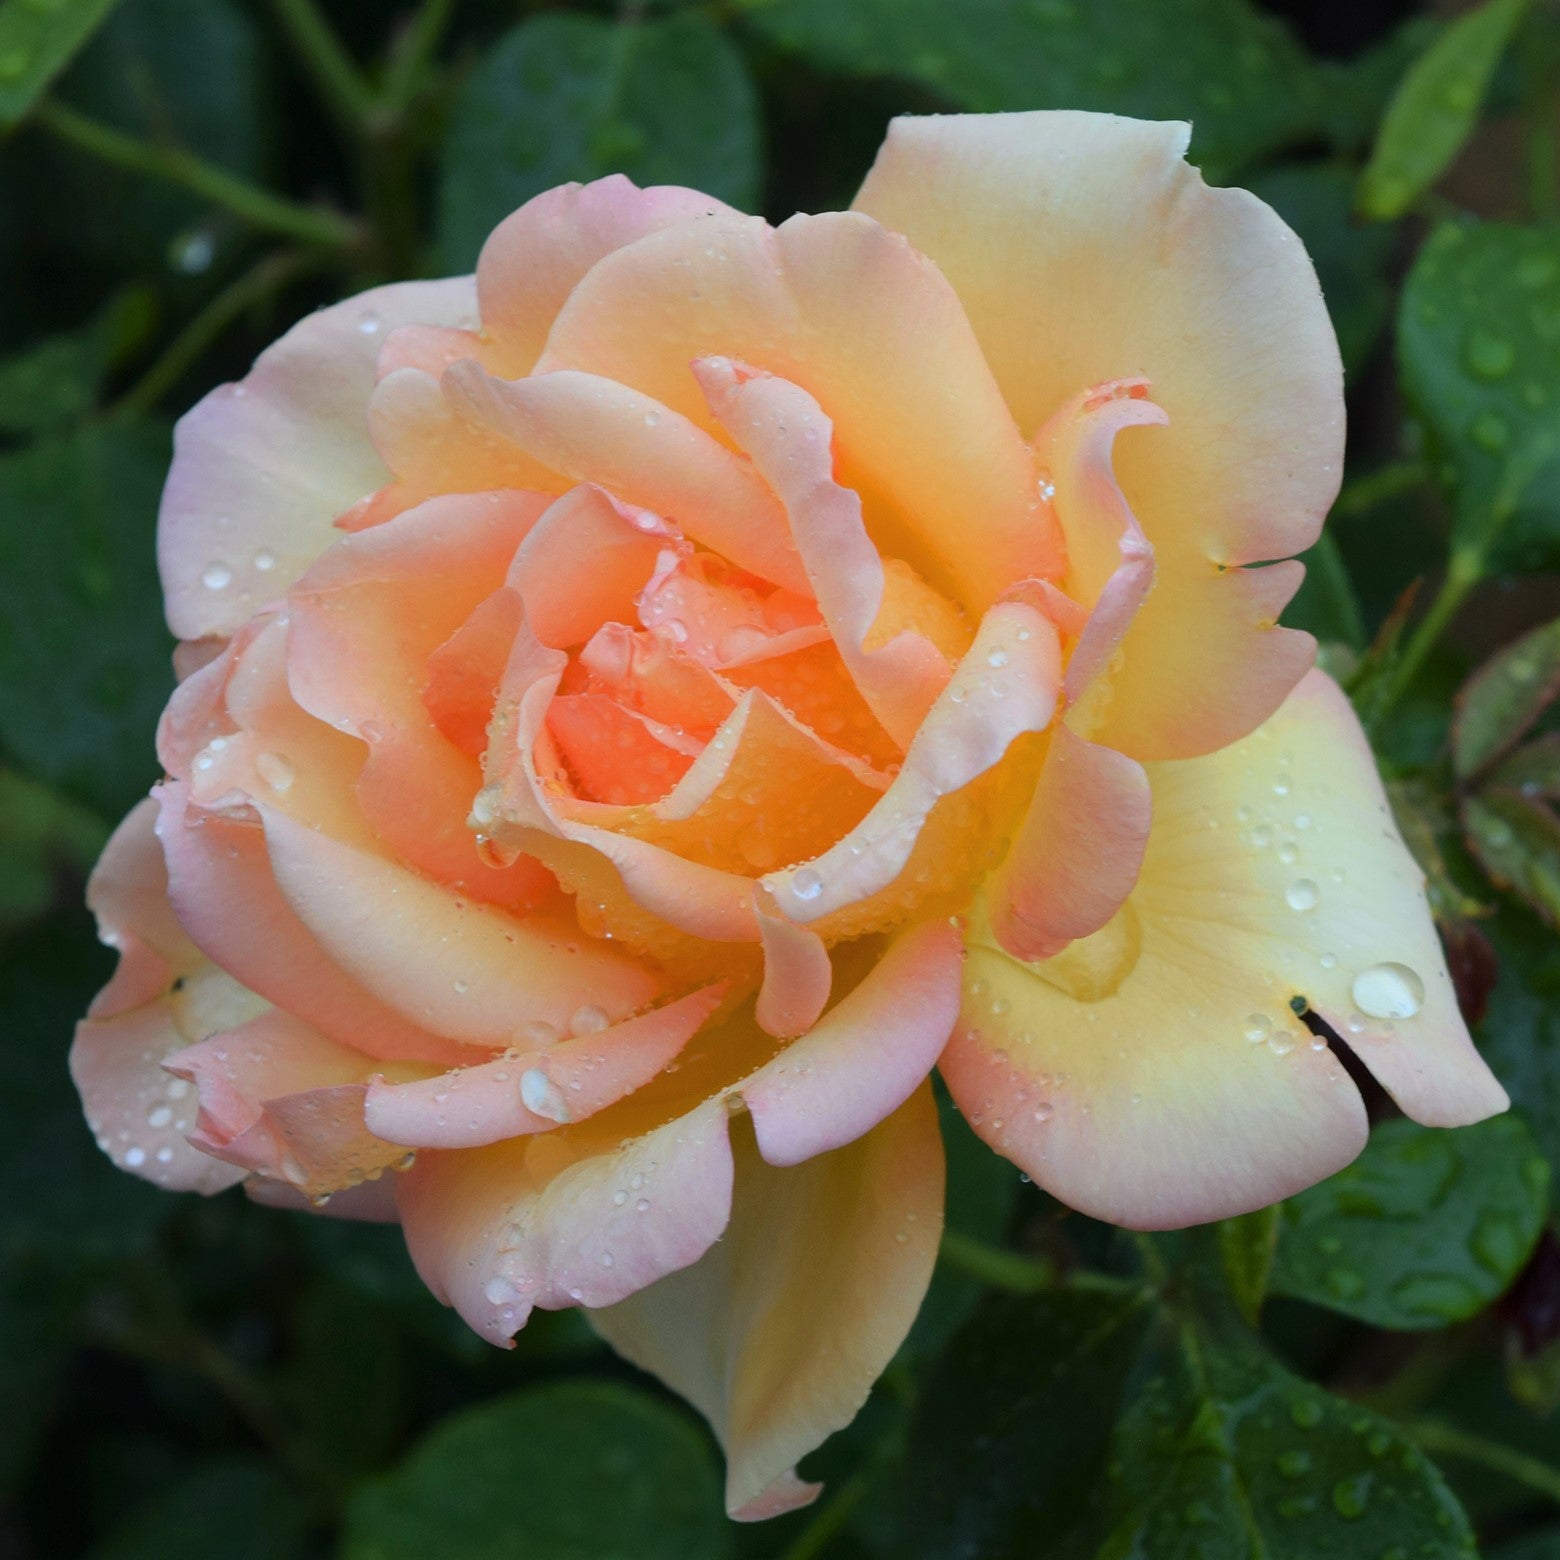 Angelus Styles - Smooth gradients and awesome depth on these roses